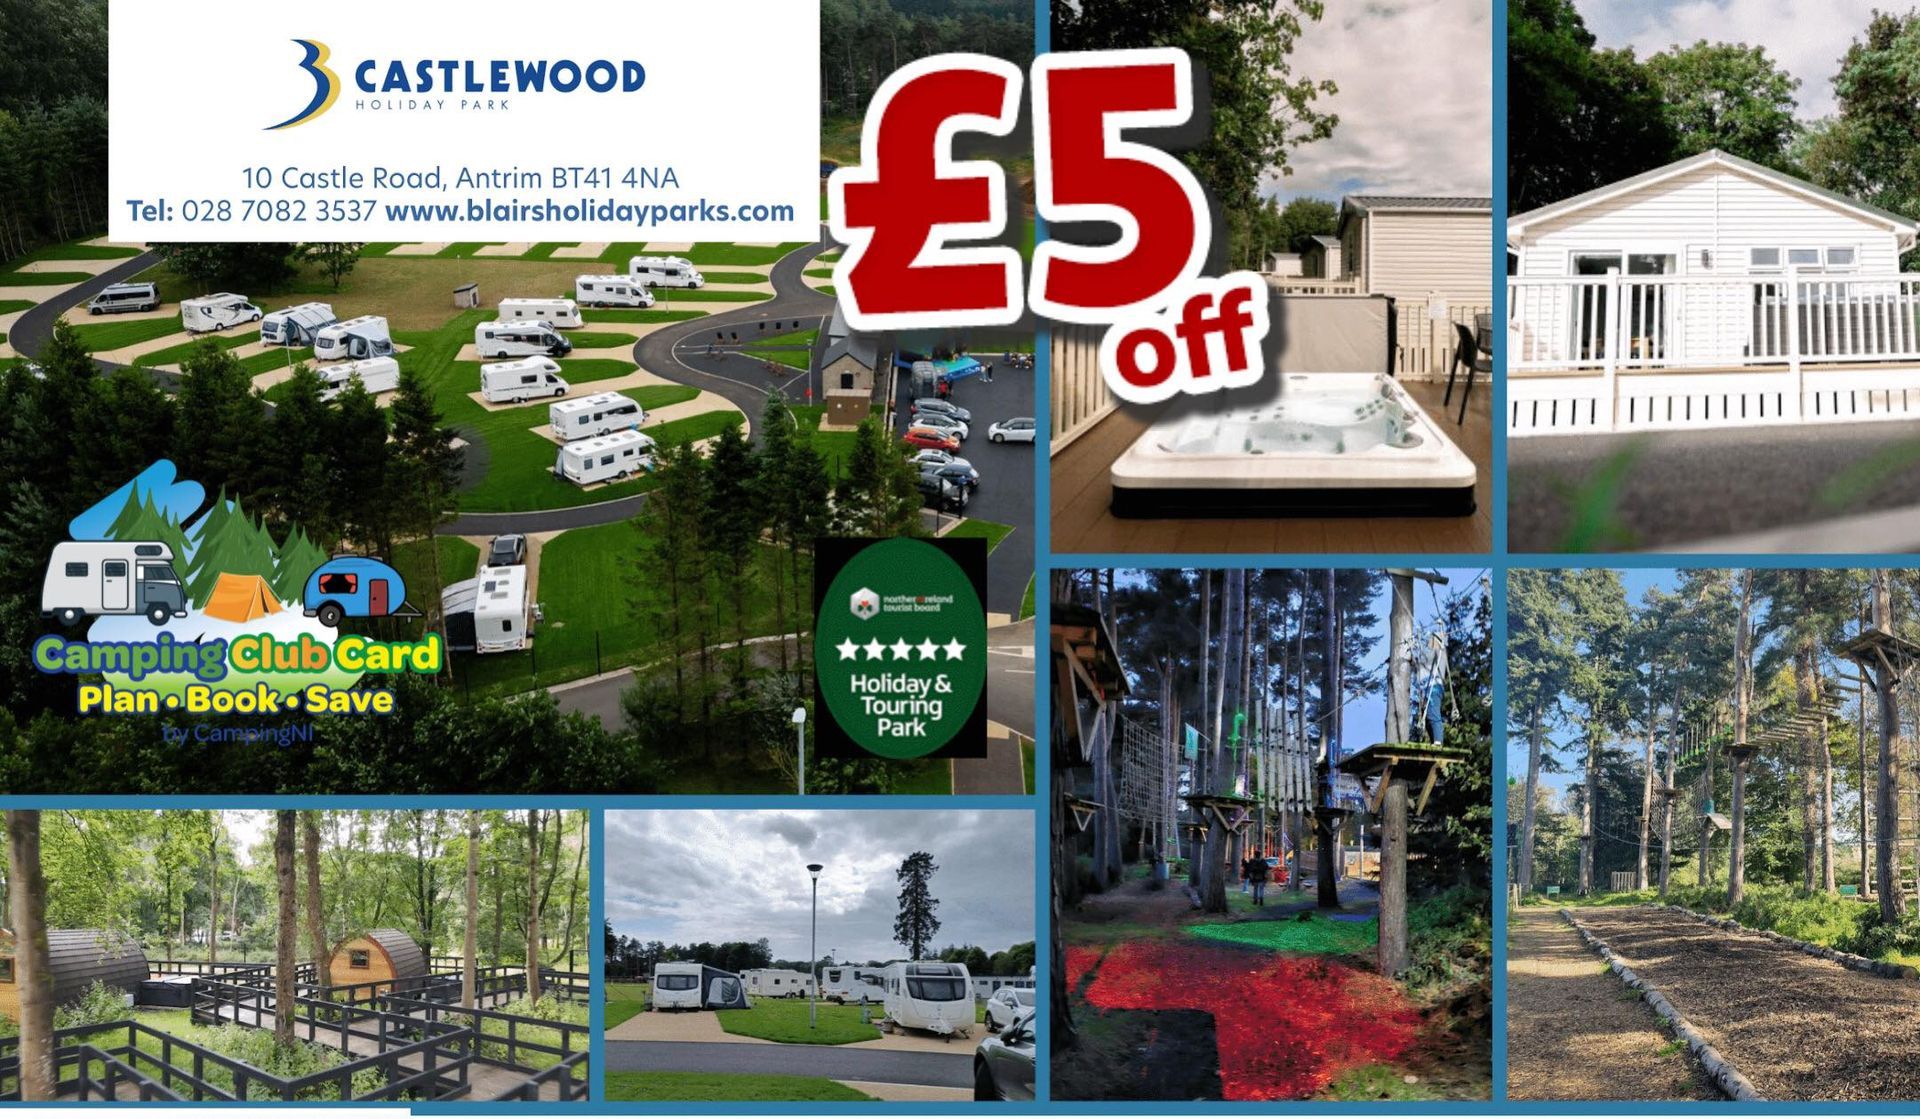 Castlewood Holiday Park in Antrim offers Camping Club Card members £5 off a night